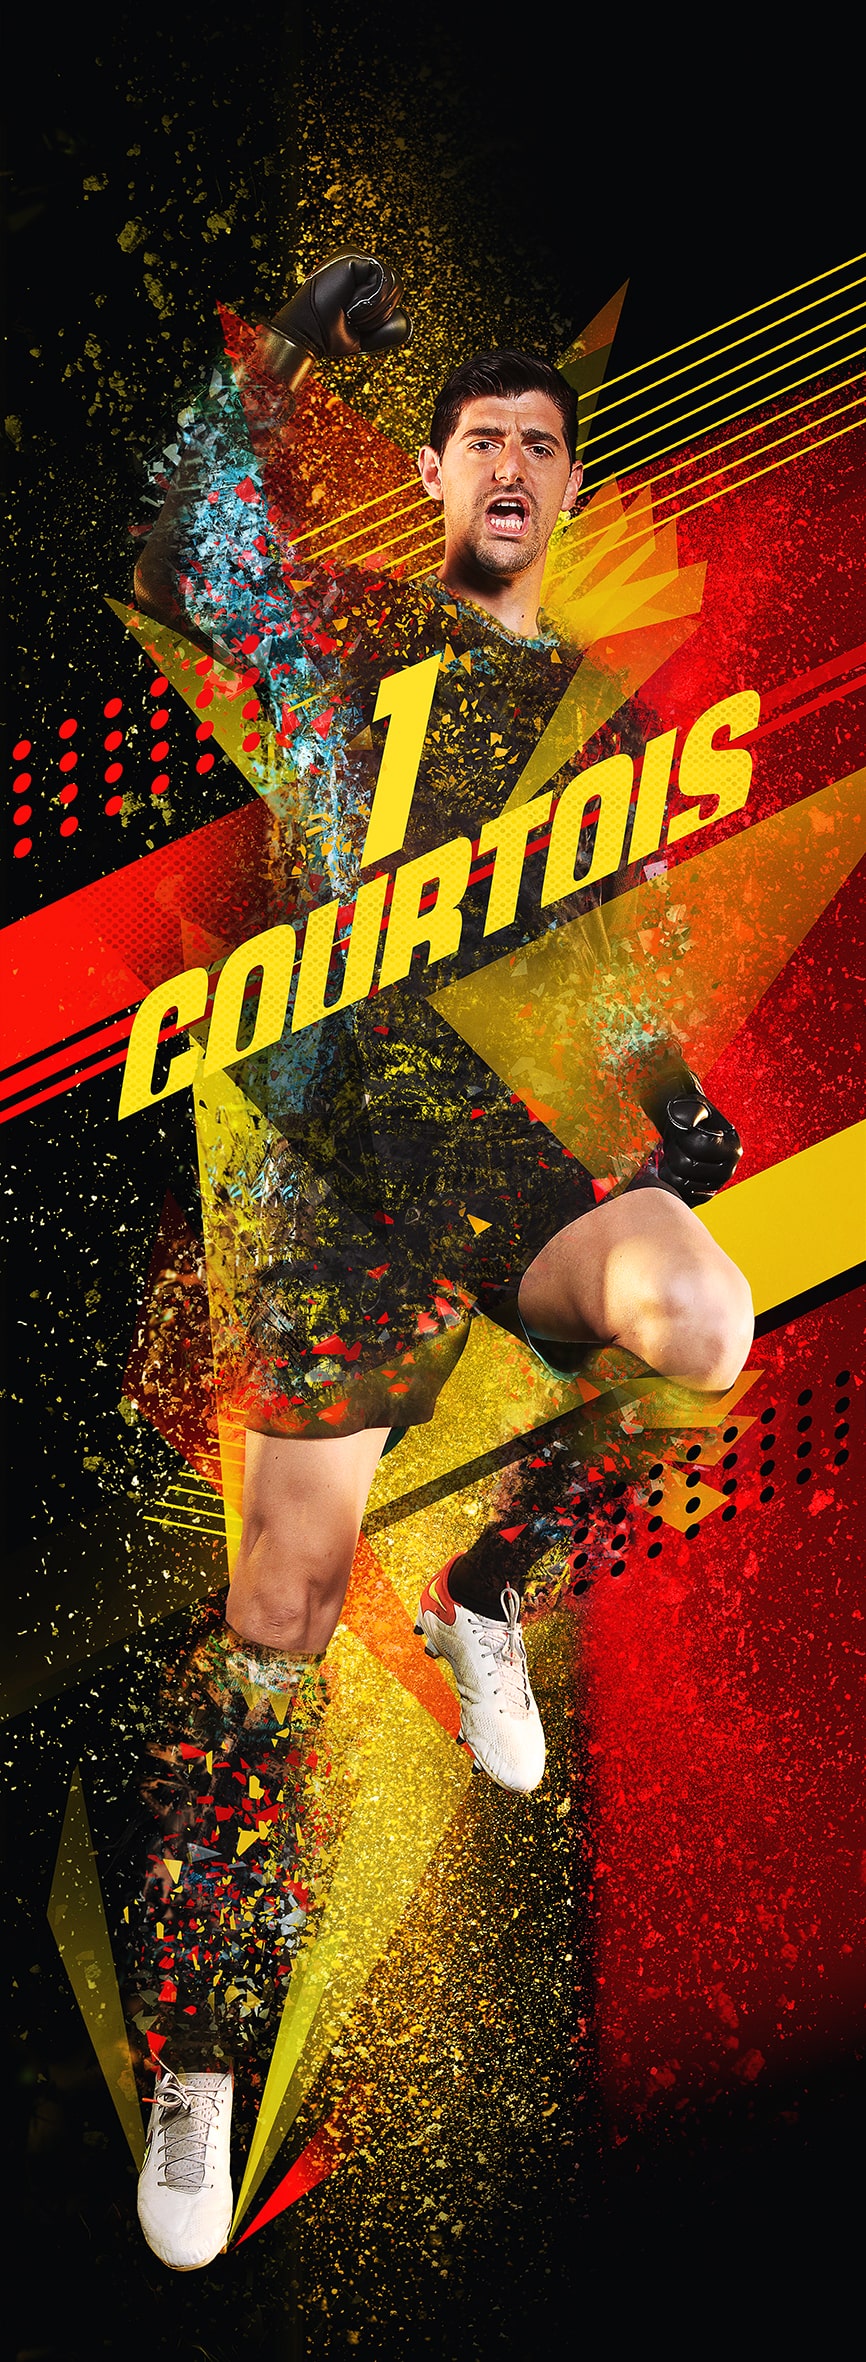 Courtois Doorflag Advertising Photography Red Devils